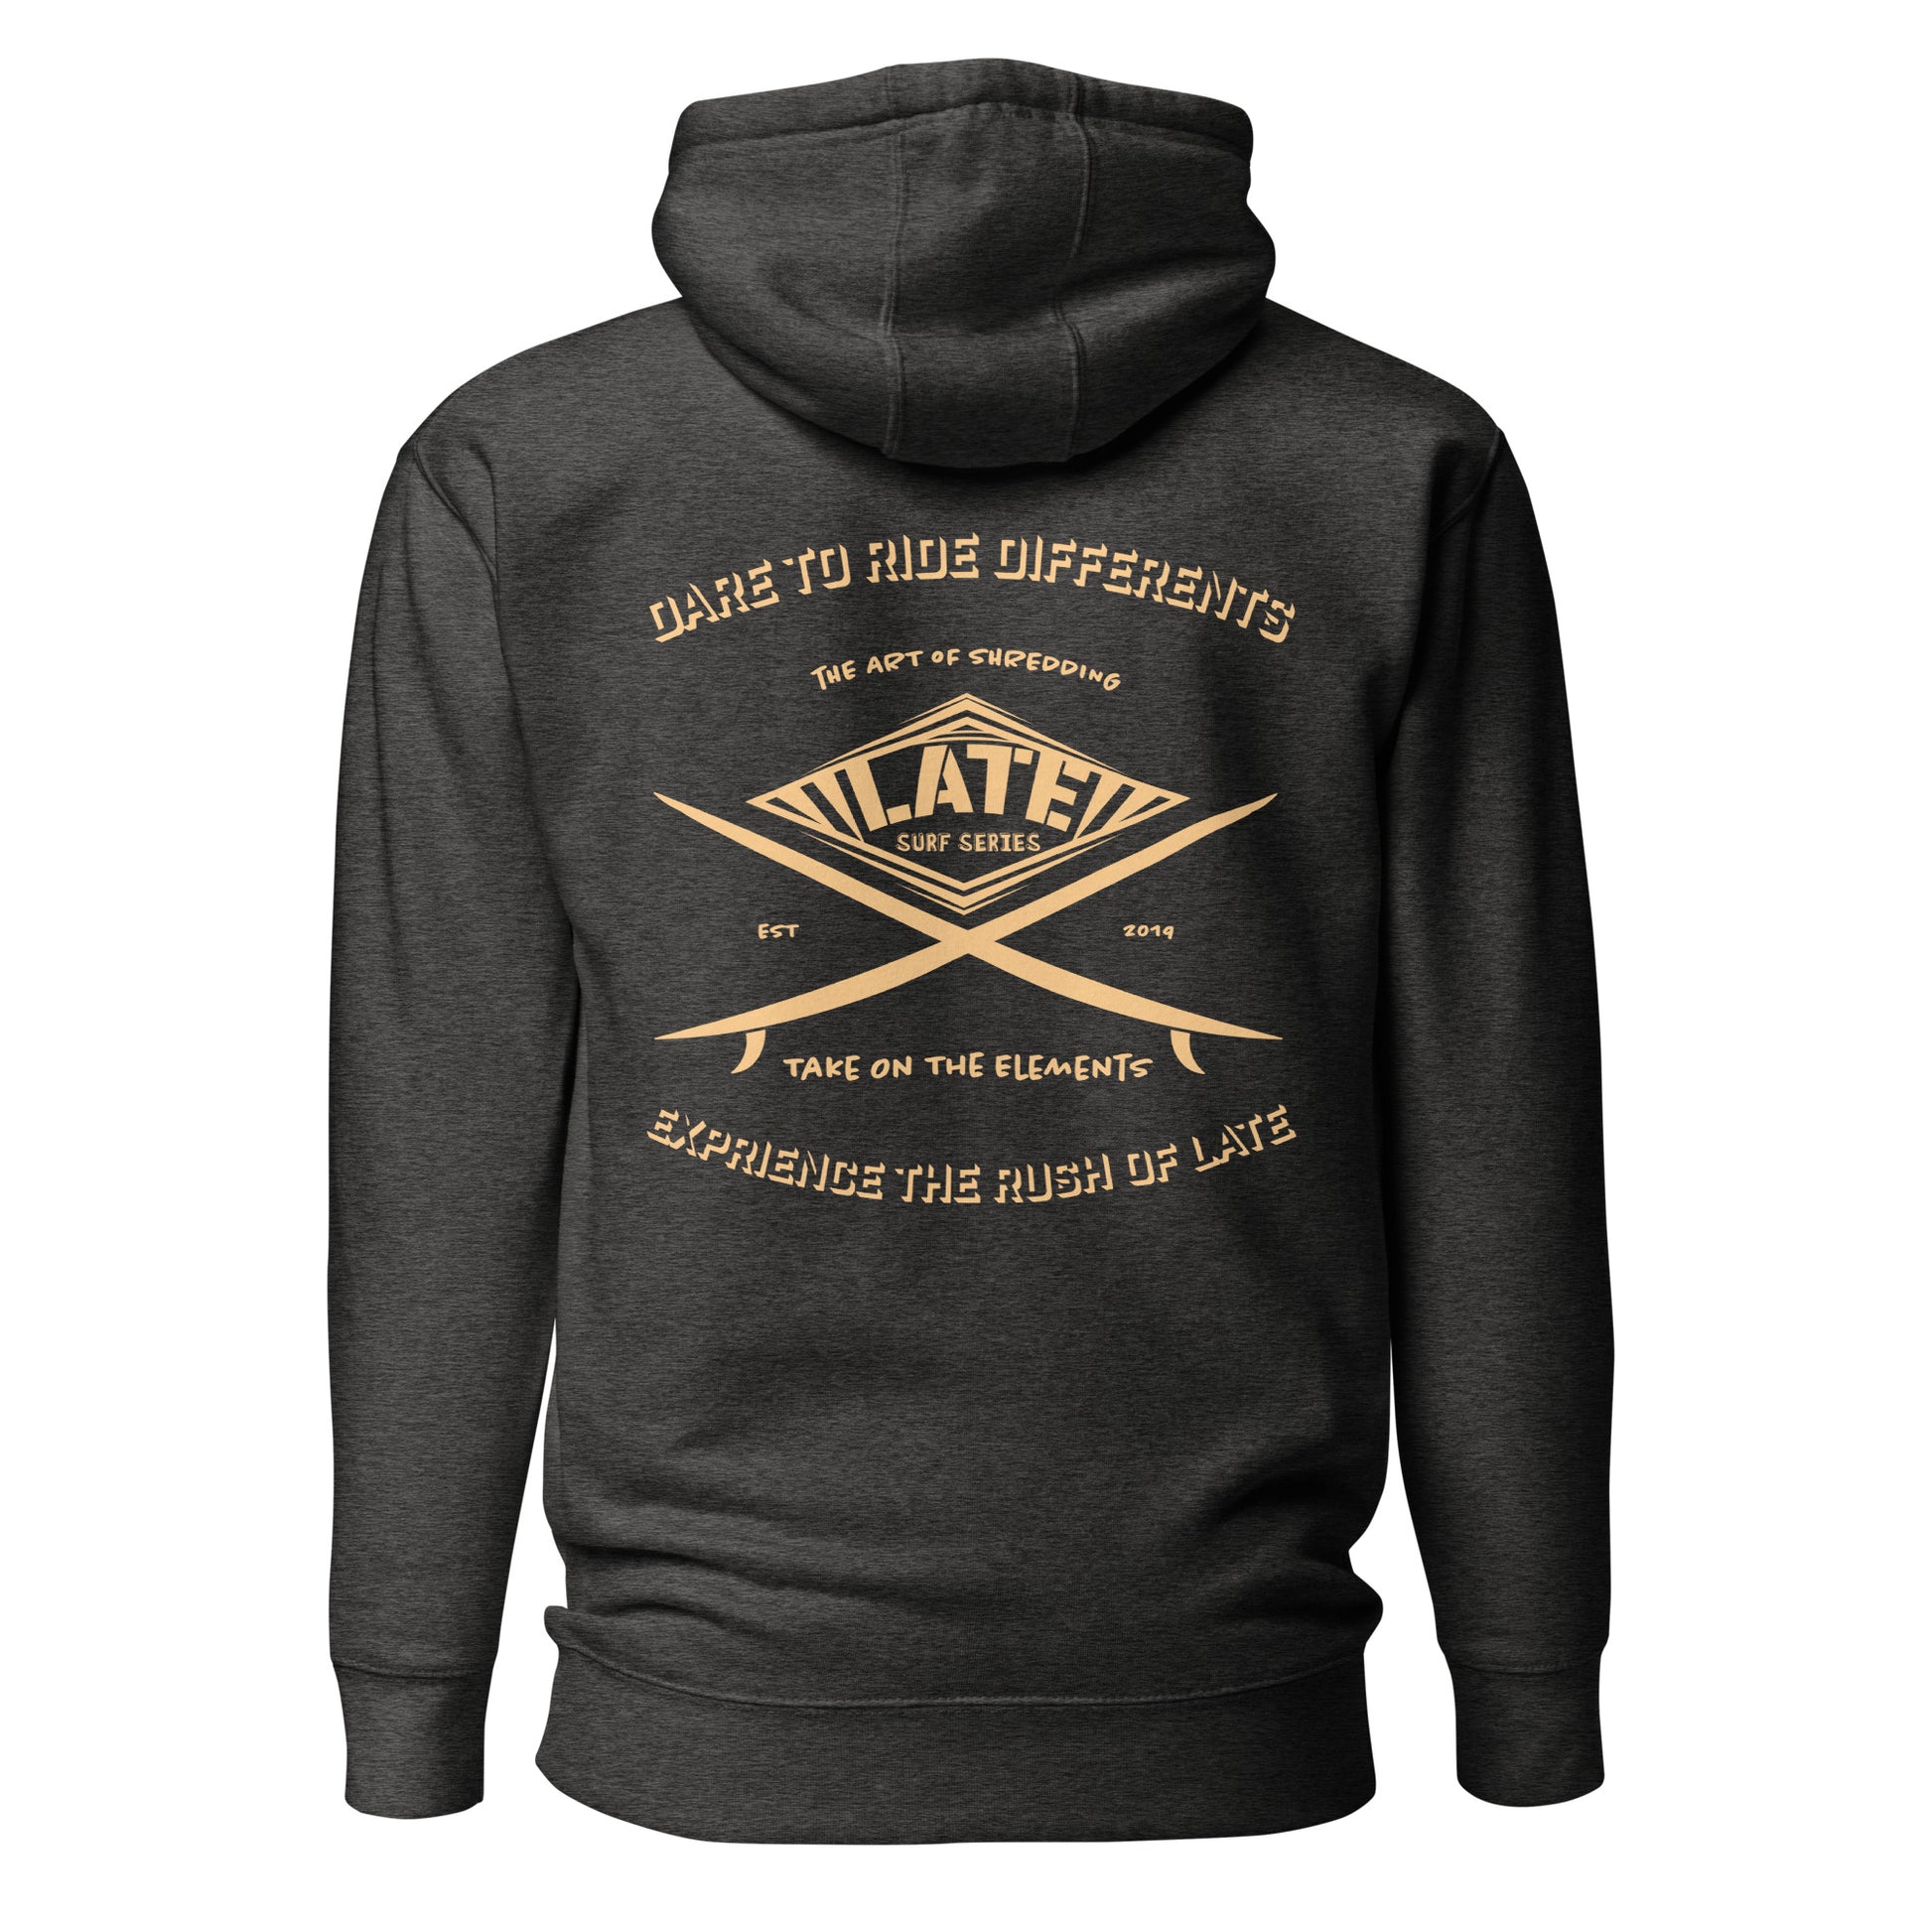 Hoodie surf charcoal heather dare to ride differents / the art of shredding / take on the elements / Logo Late surf series